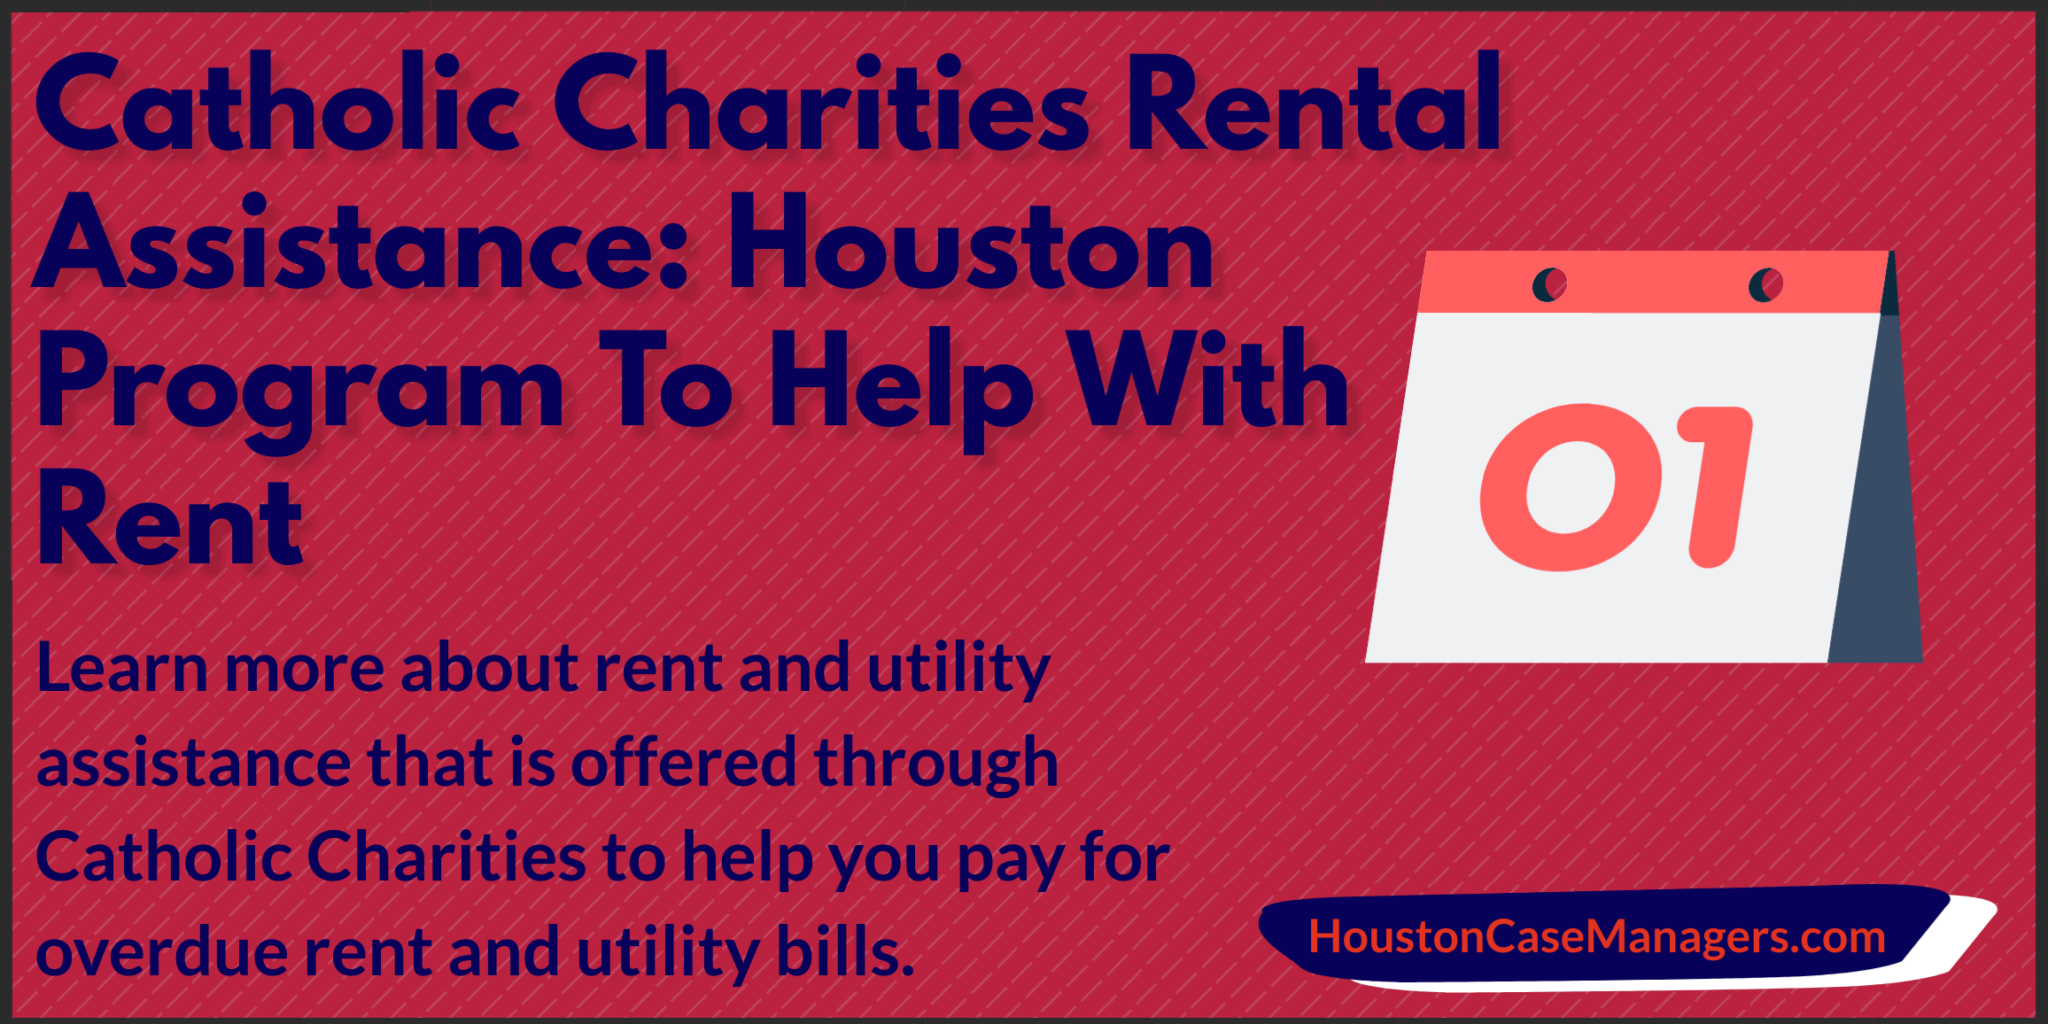 Catholic Charities Rent Assistance Houston Program To Help With Rent